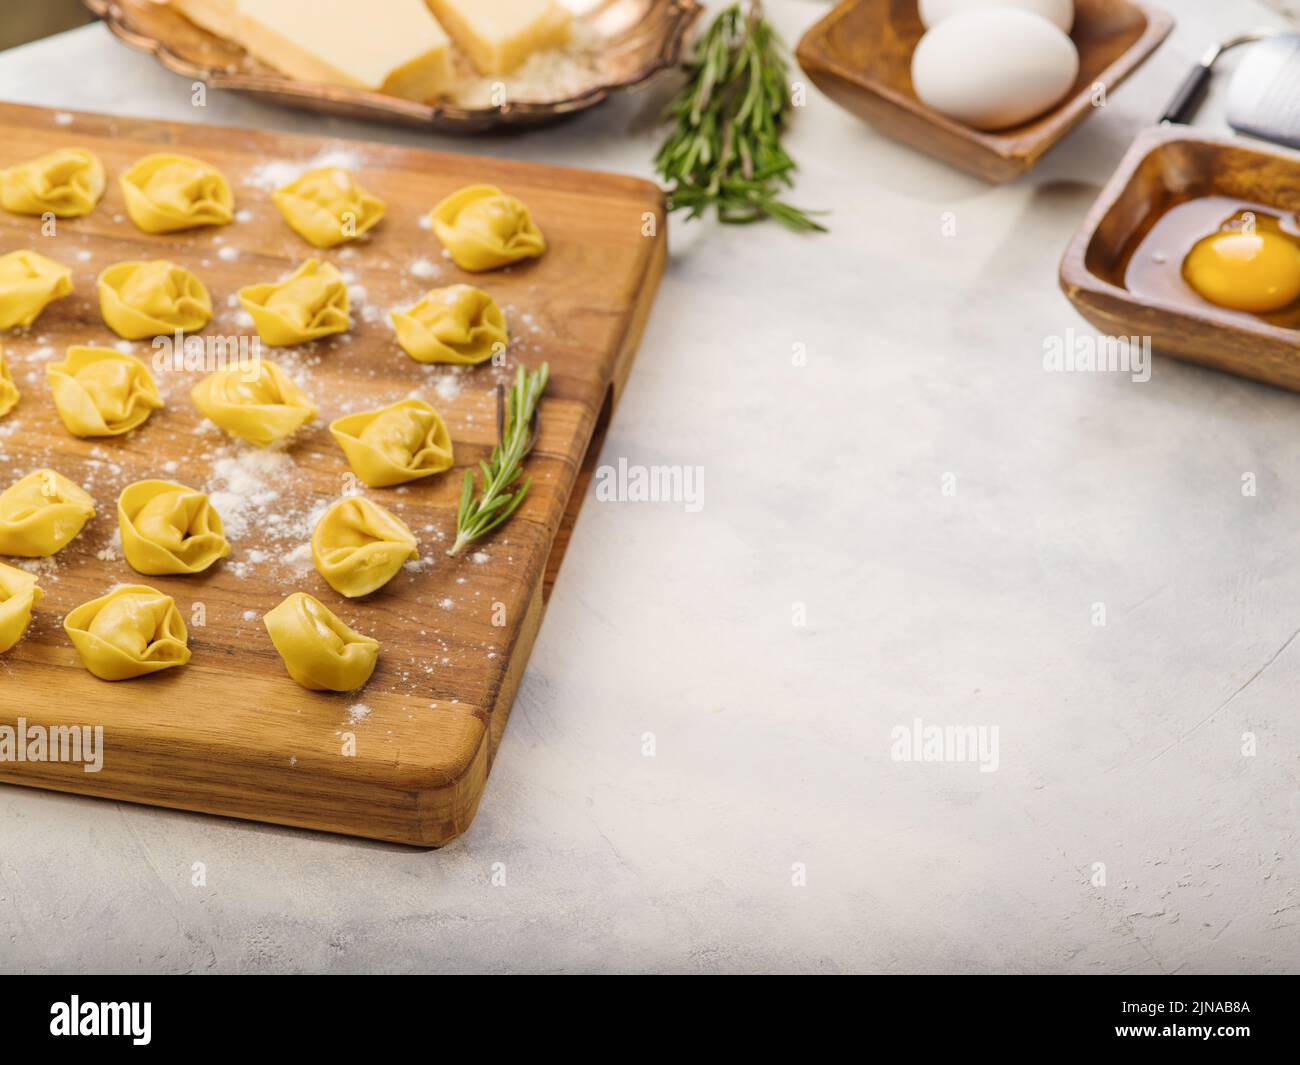 Cooking homemade ravioli, dumplings stuffed with minced meat - pork and beef. Dumplings on a wooden cutting board, ingredients, sprigs of rosemary on Stock Photo